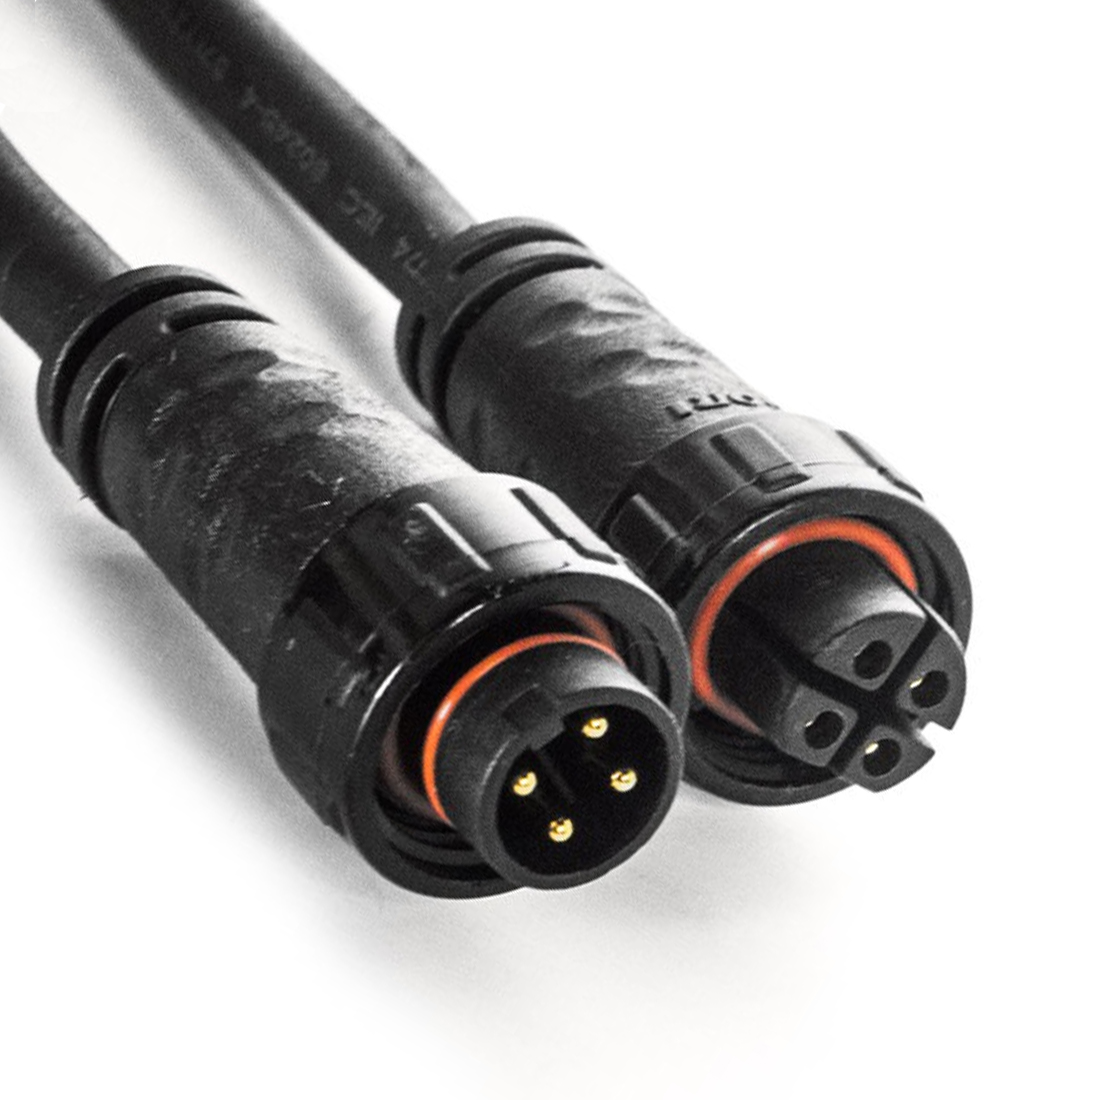  Power IP ext. cable 10m Wifly EXR Par IP